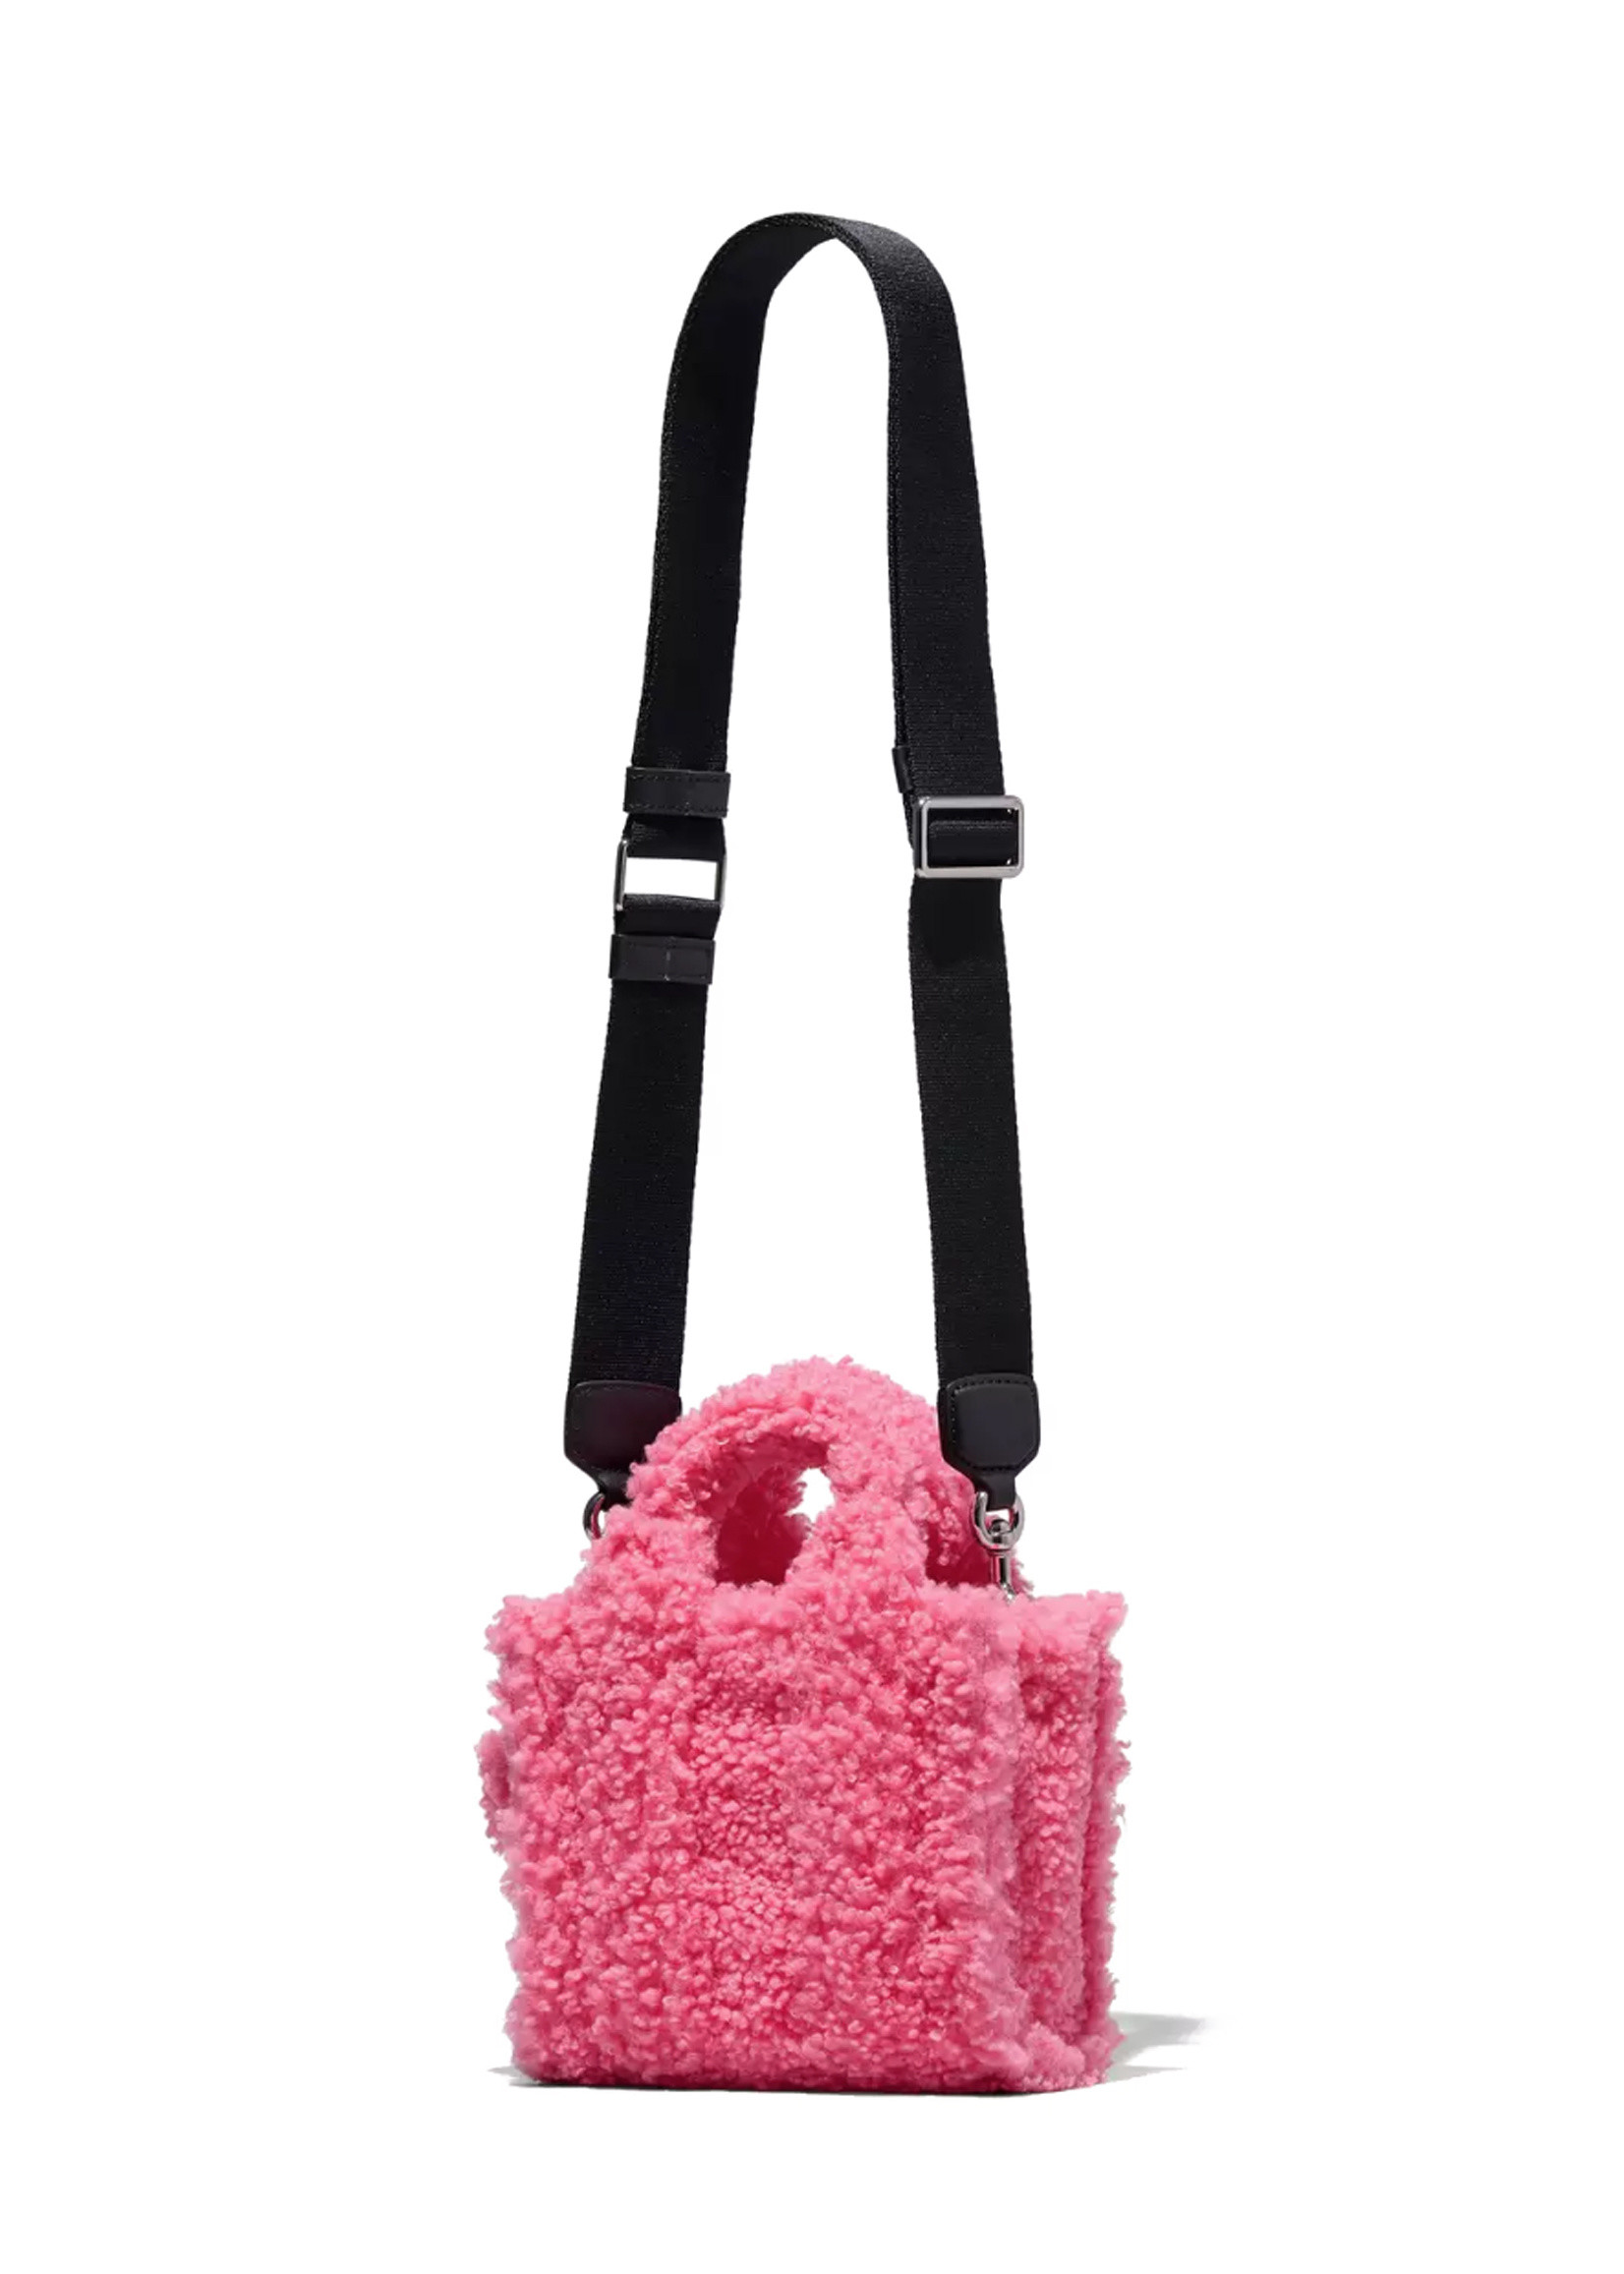 MARC JACOBS / The Teddy Micro Tote - BRGD